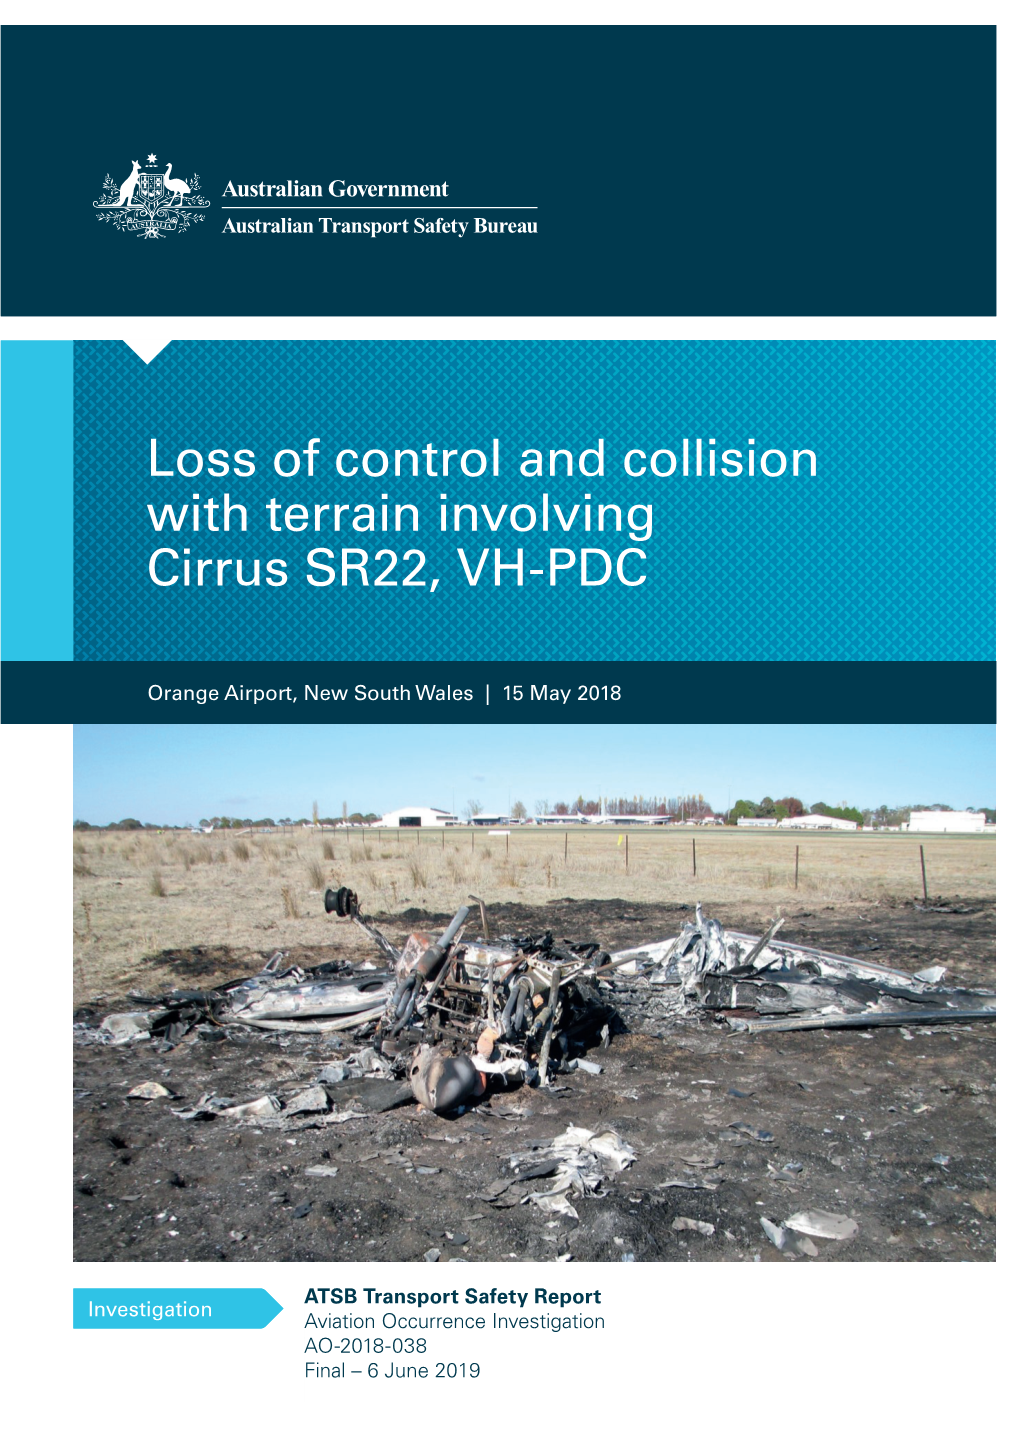 Loss of Control and Collision with Terrain Involving Cirrus SR22, VH-PDC, Orange Airport, NSW, on 15 May 2018